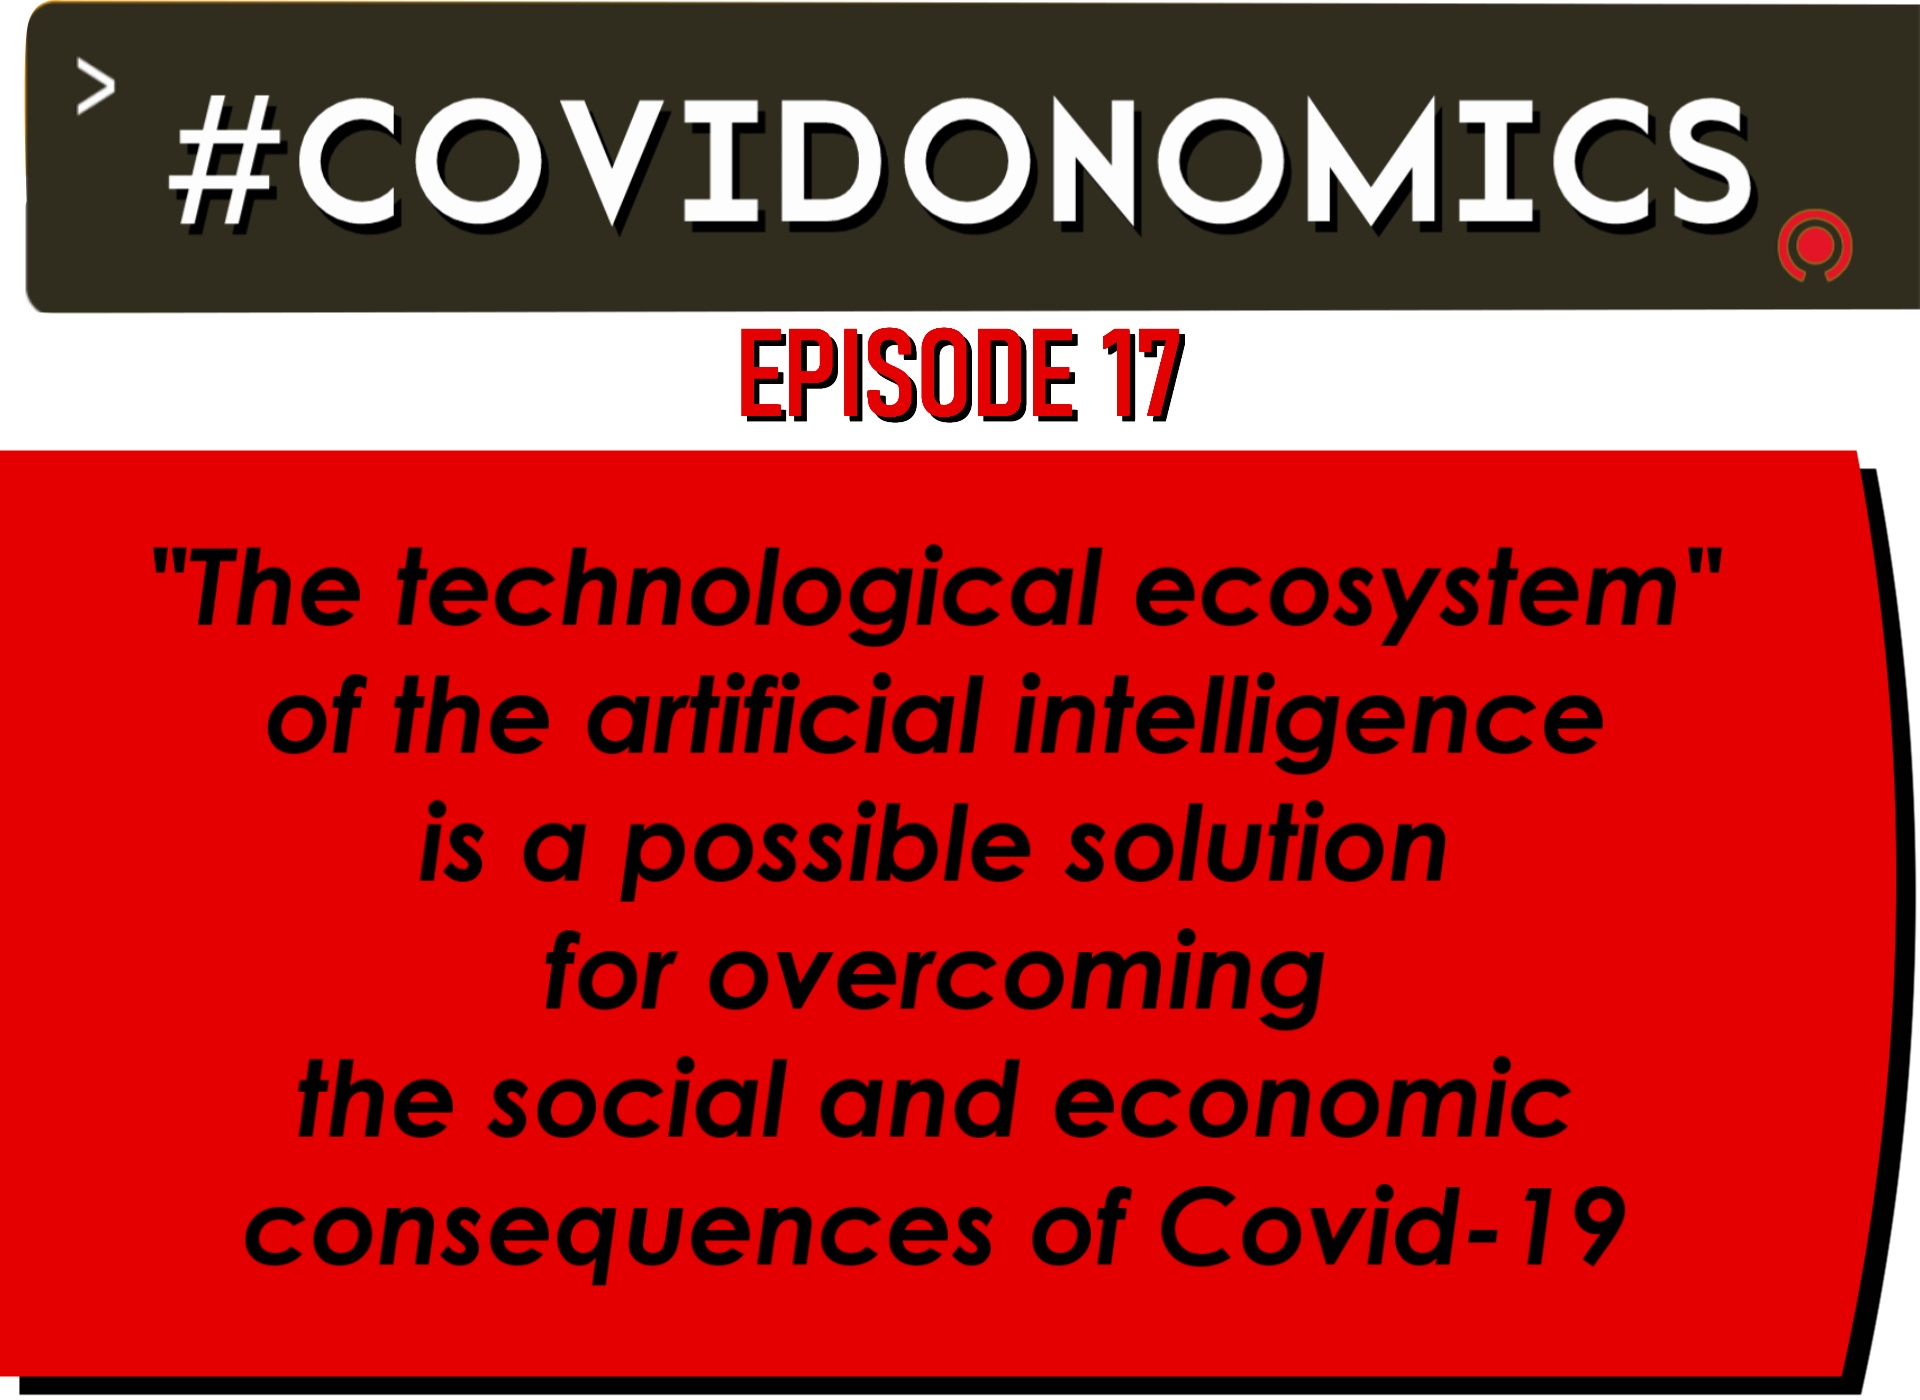 "The technological ecosystem" of the artificial intelligence is a possible solution for overcoming the social and economic consequences of Covid-19